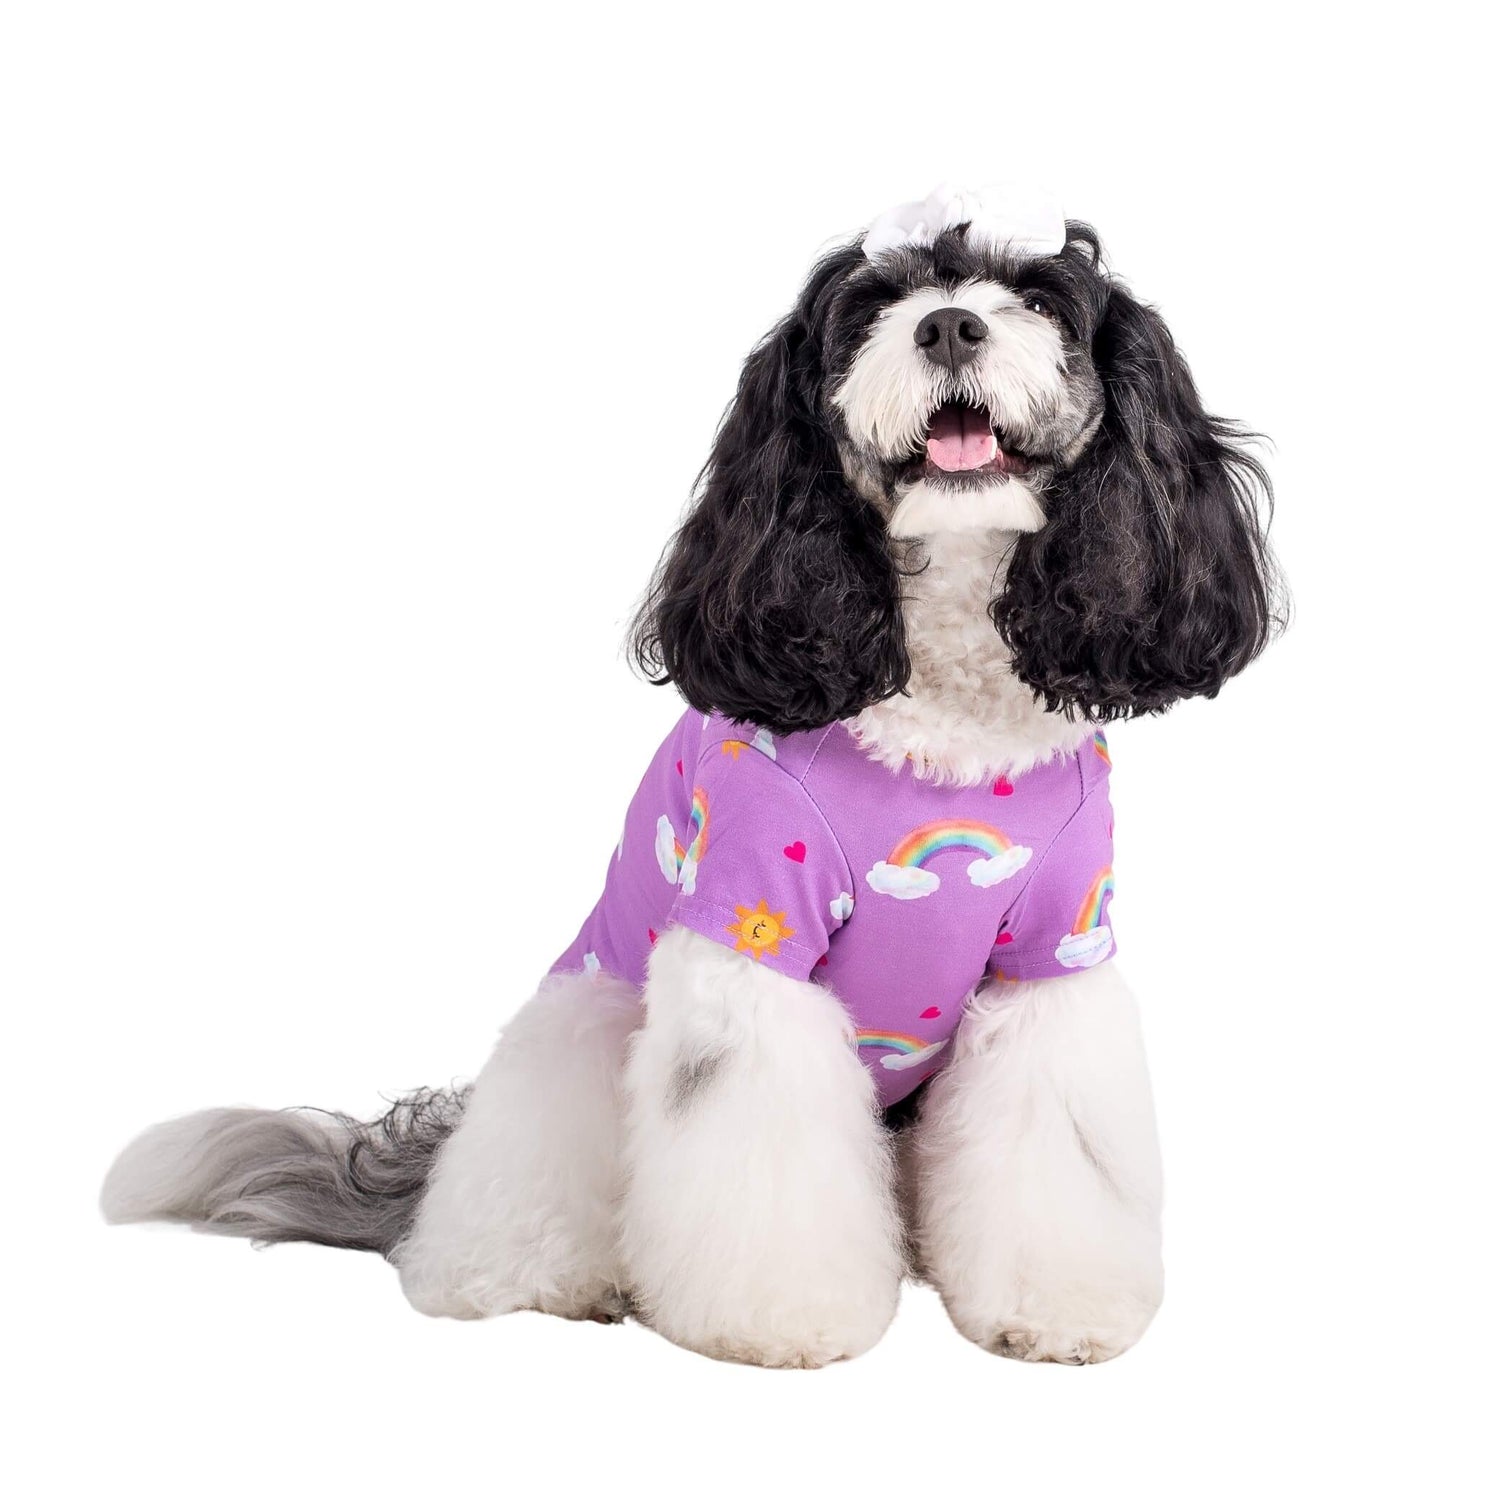 A black and white Cavoodle wearing Vibrant Hound's Chasing Rainbow dog pyjama. These dog PJs are purple with rainbows, bright suns, and love hearts printed on it.